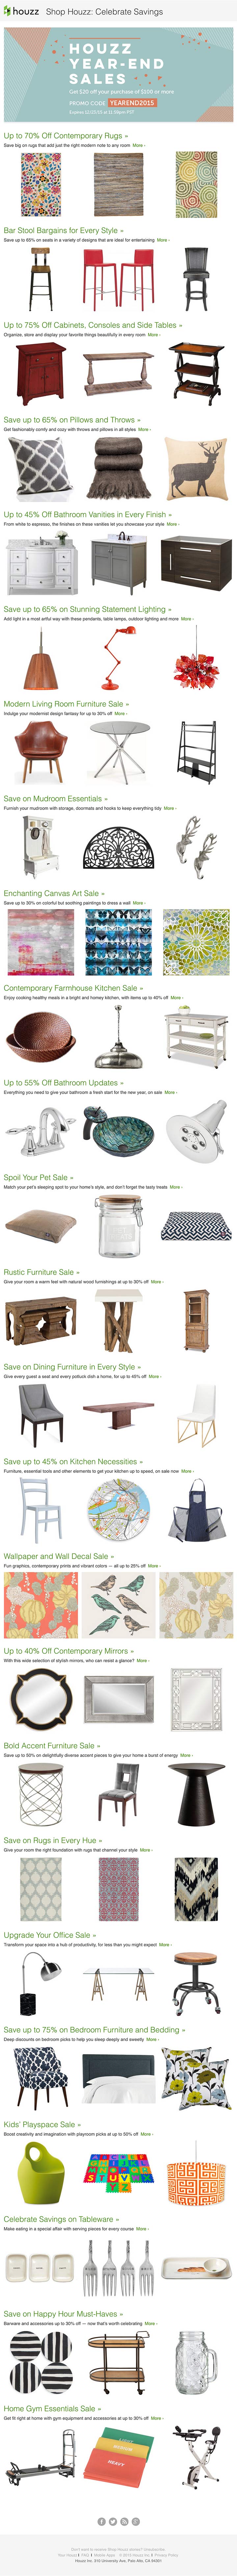 Email design for New Years savings on home supplies